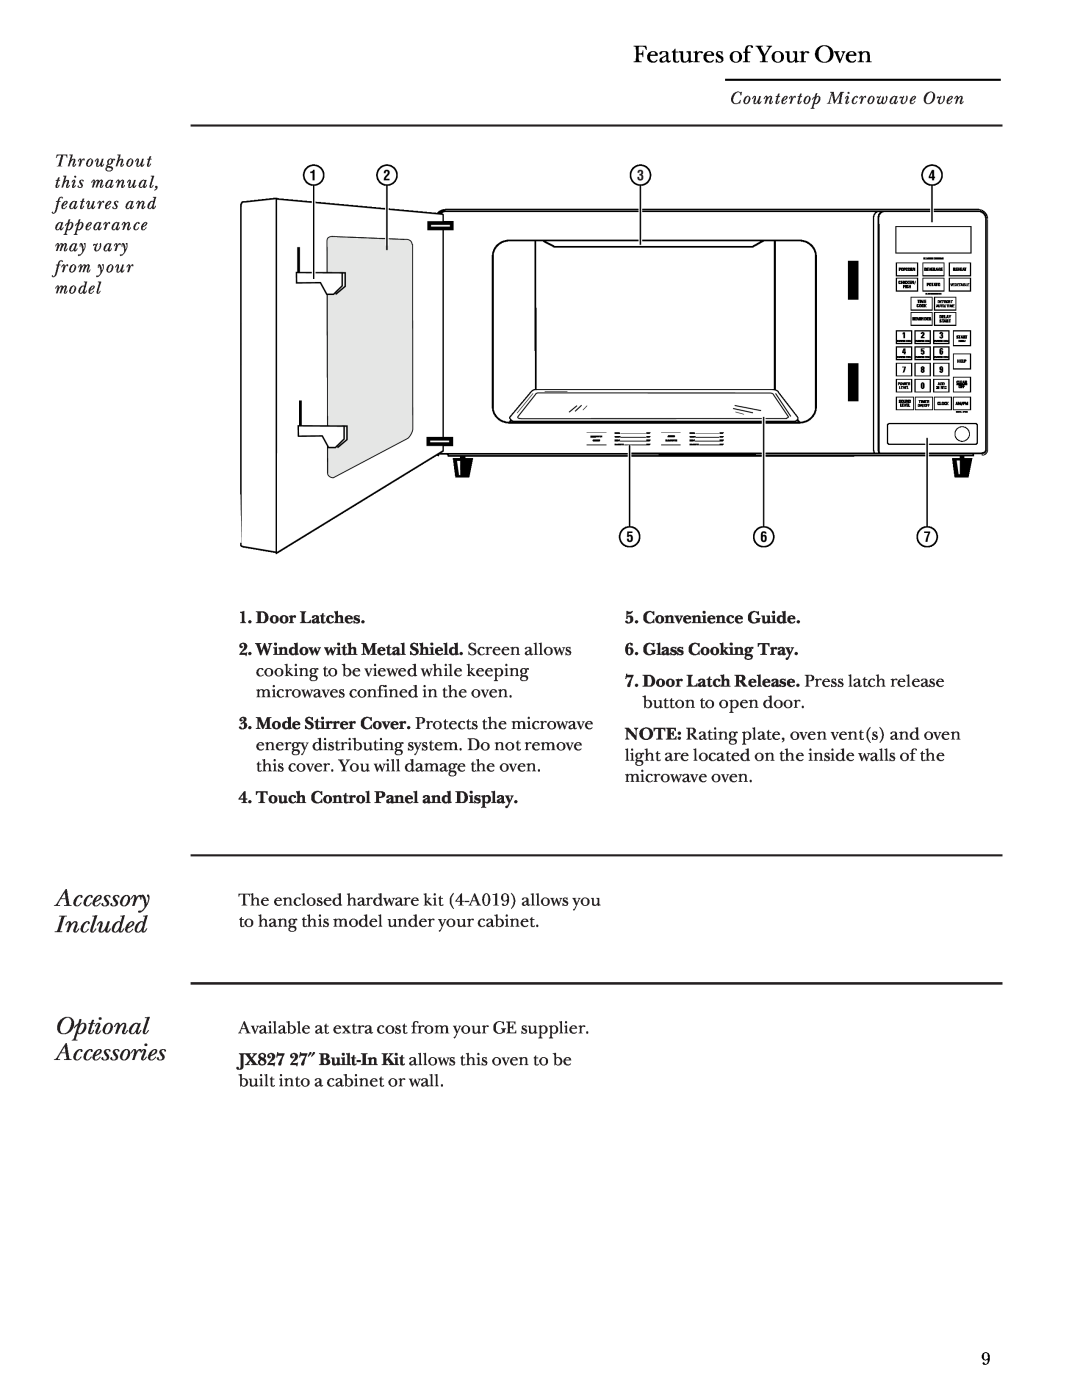 GE ZEM200 manual Features of Your Oven, Accessory Included Optional Accessories 